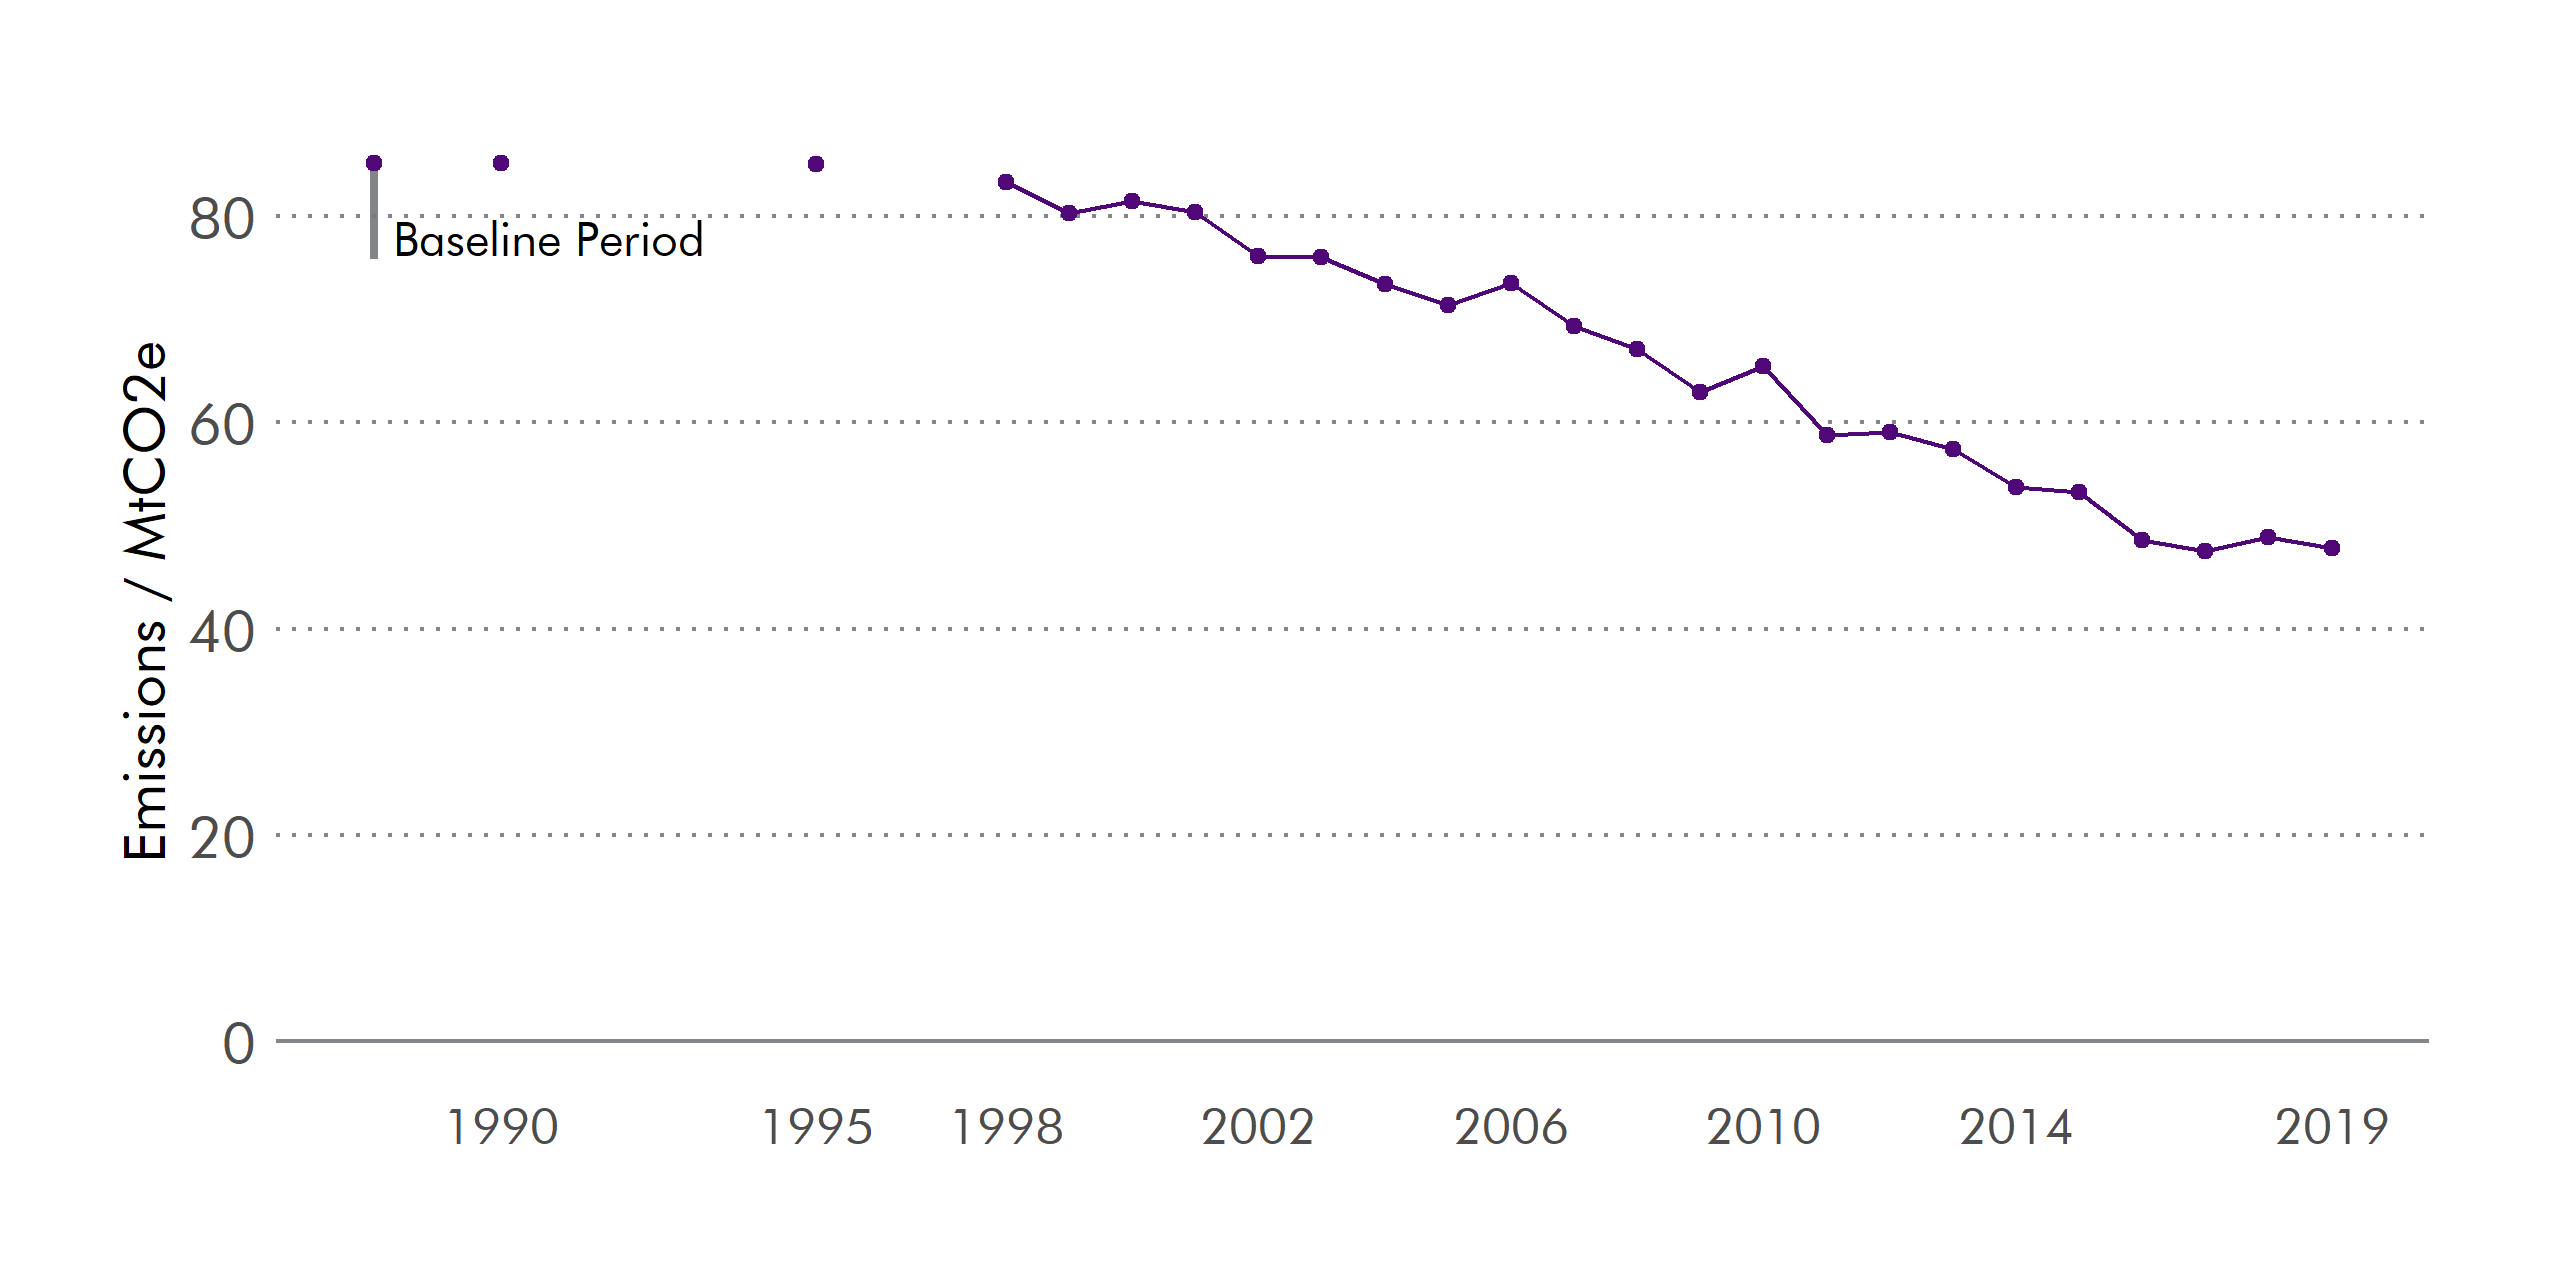 From 1990 - 2019, there was a 51.5% reduction in emissions.